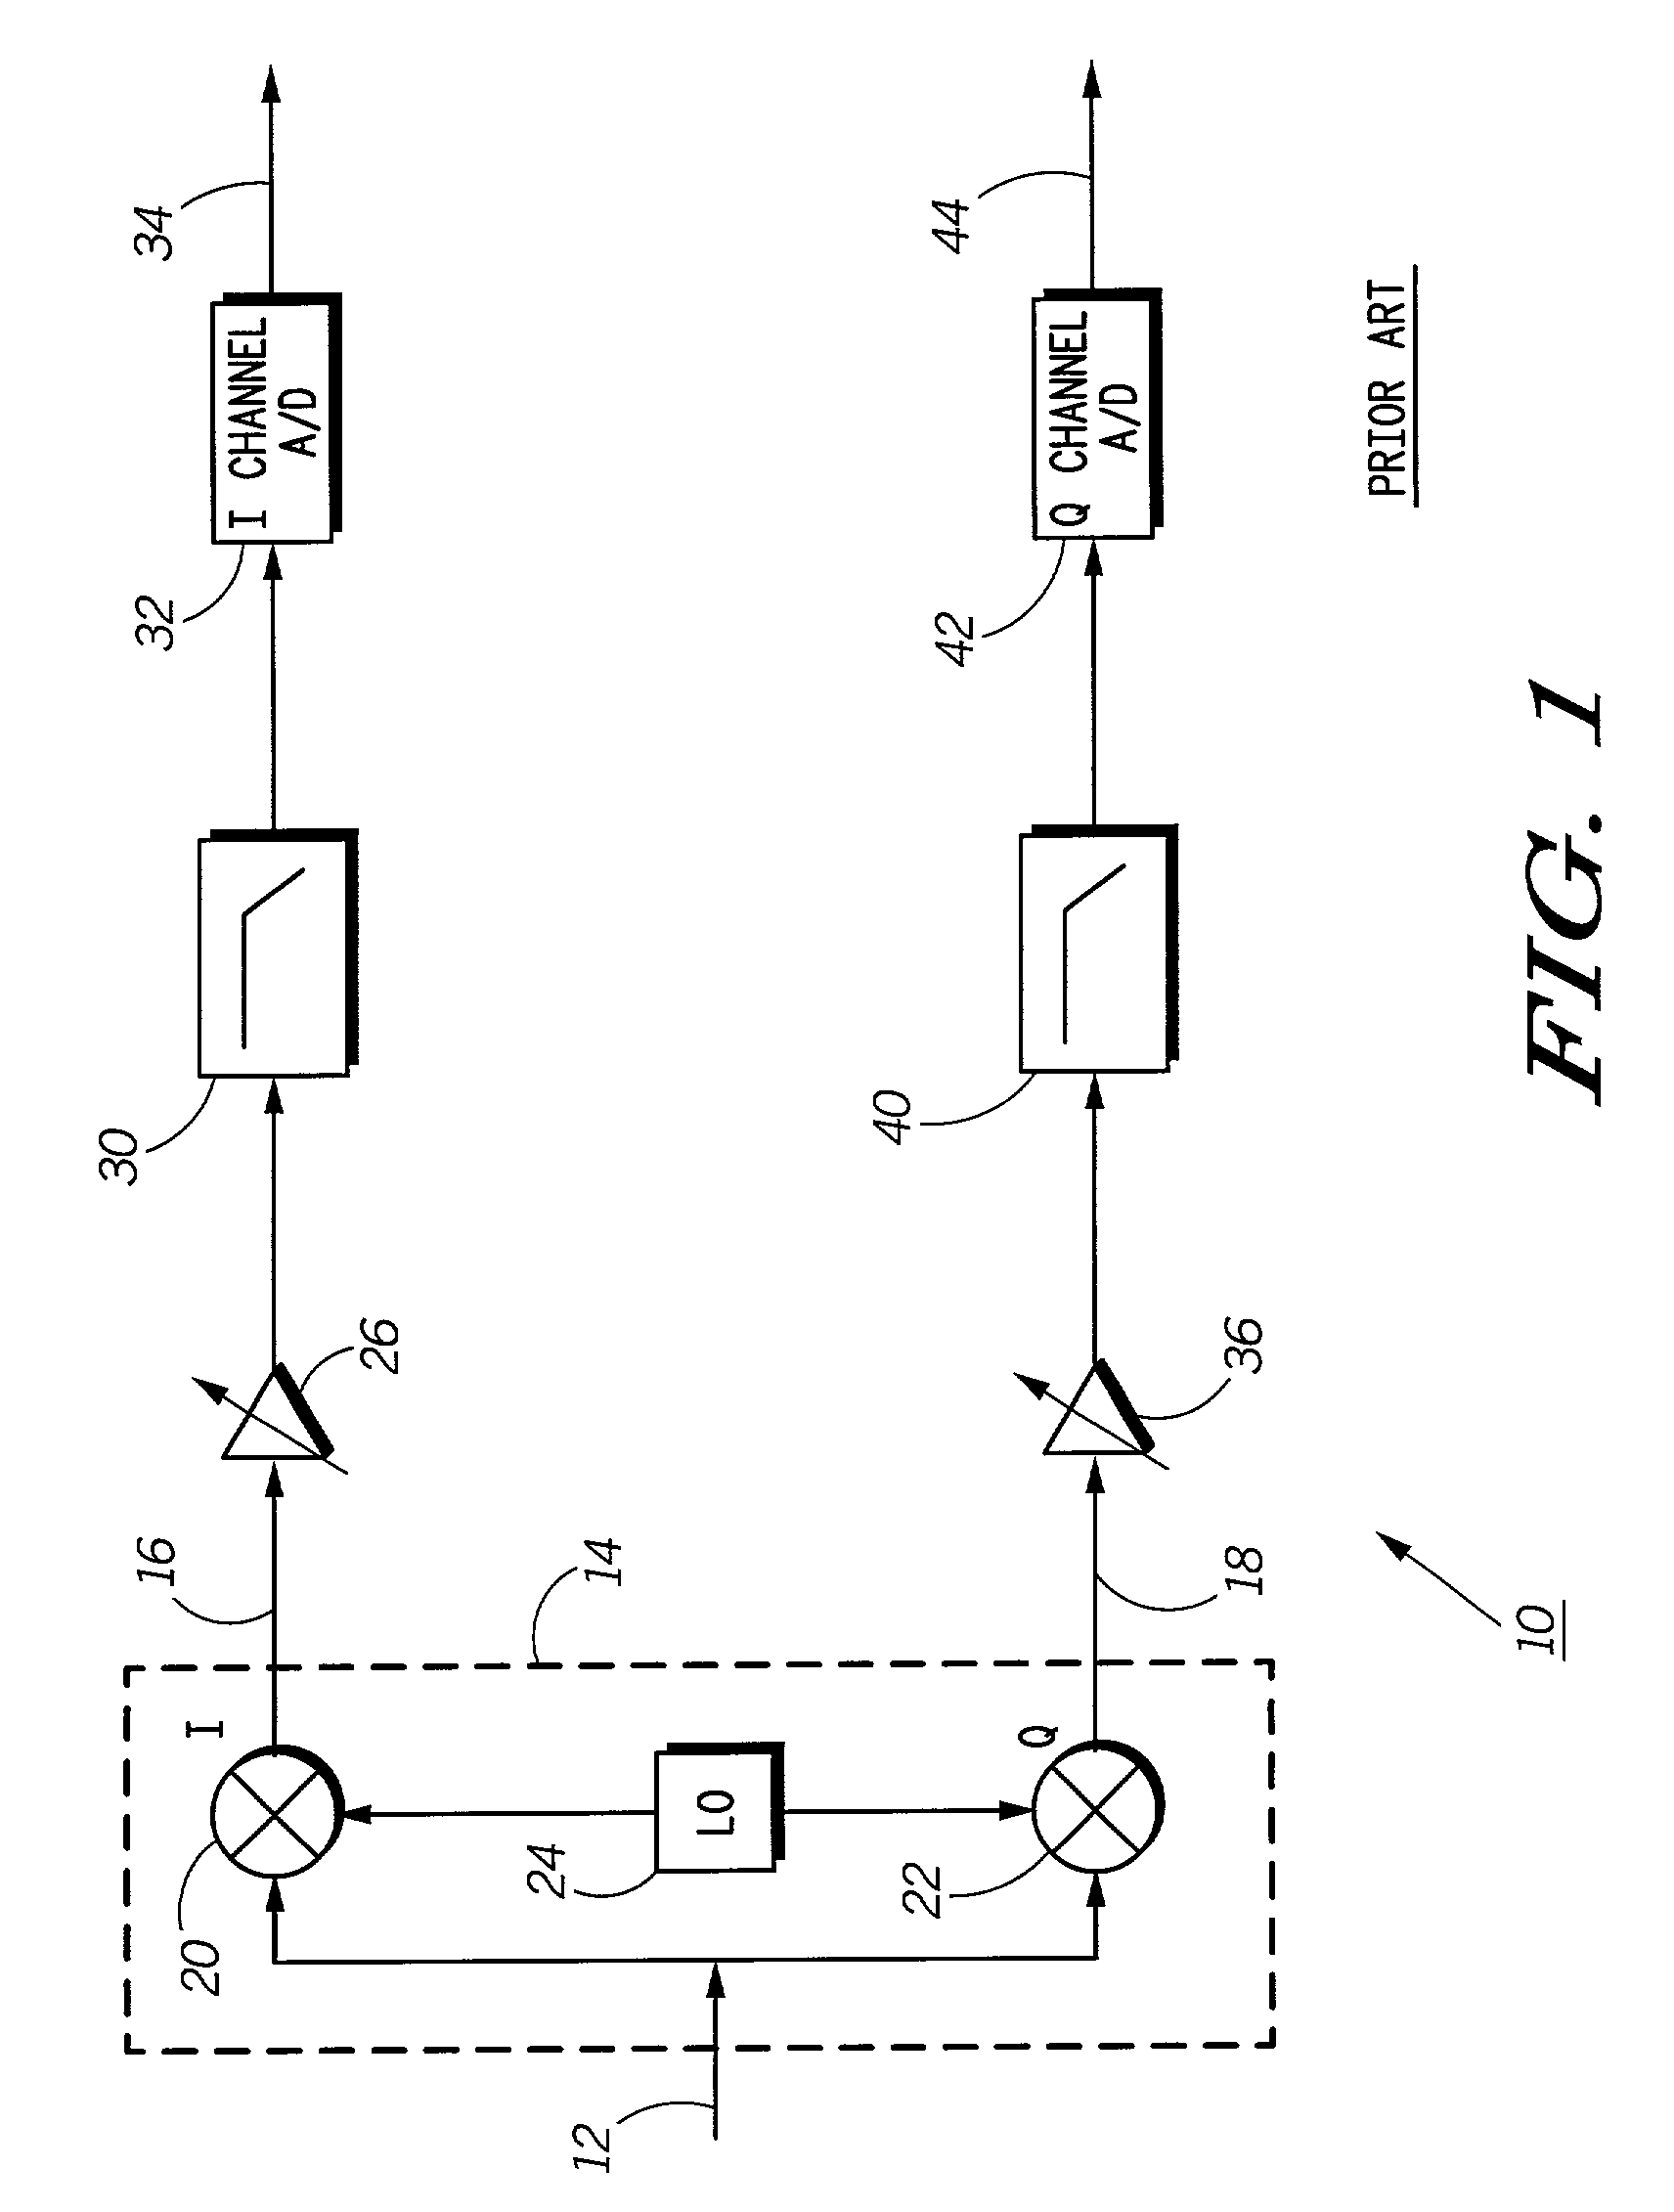 Self calibrating receive path correction system in a receiver